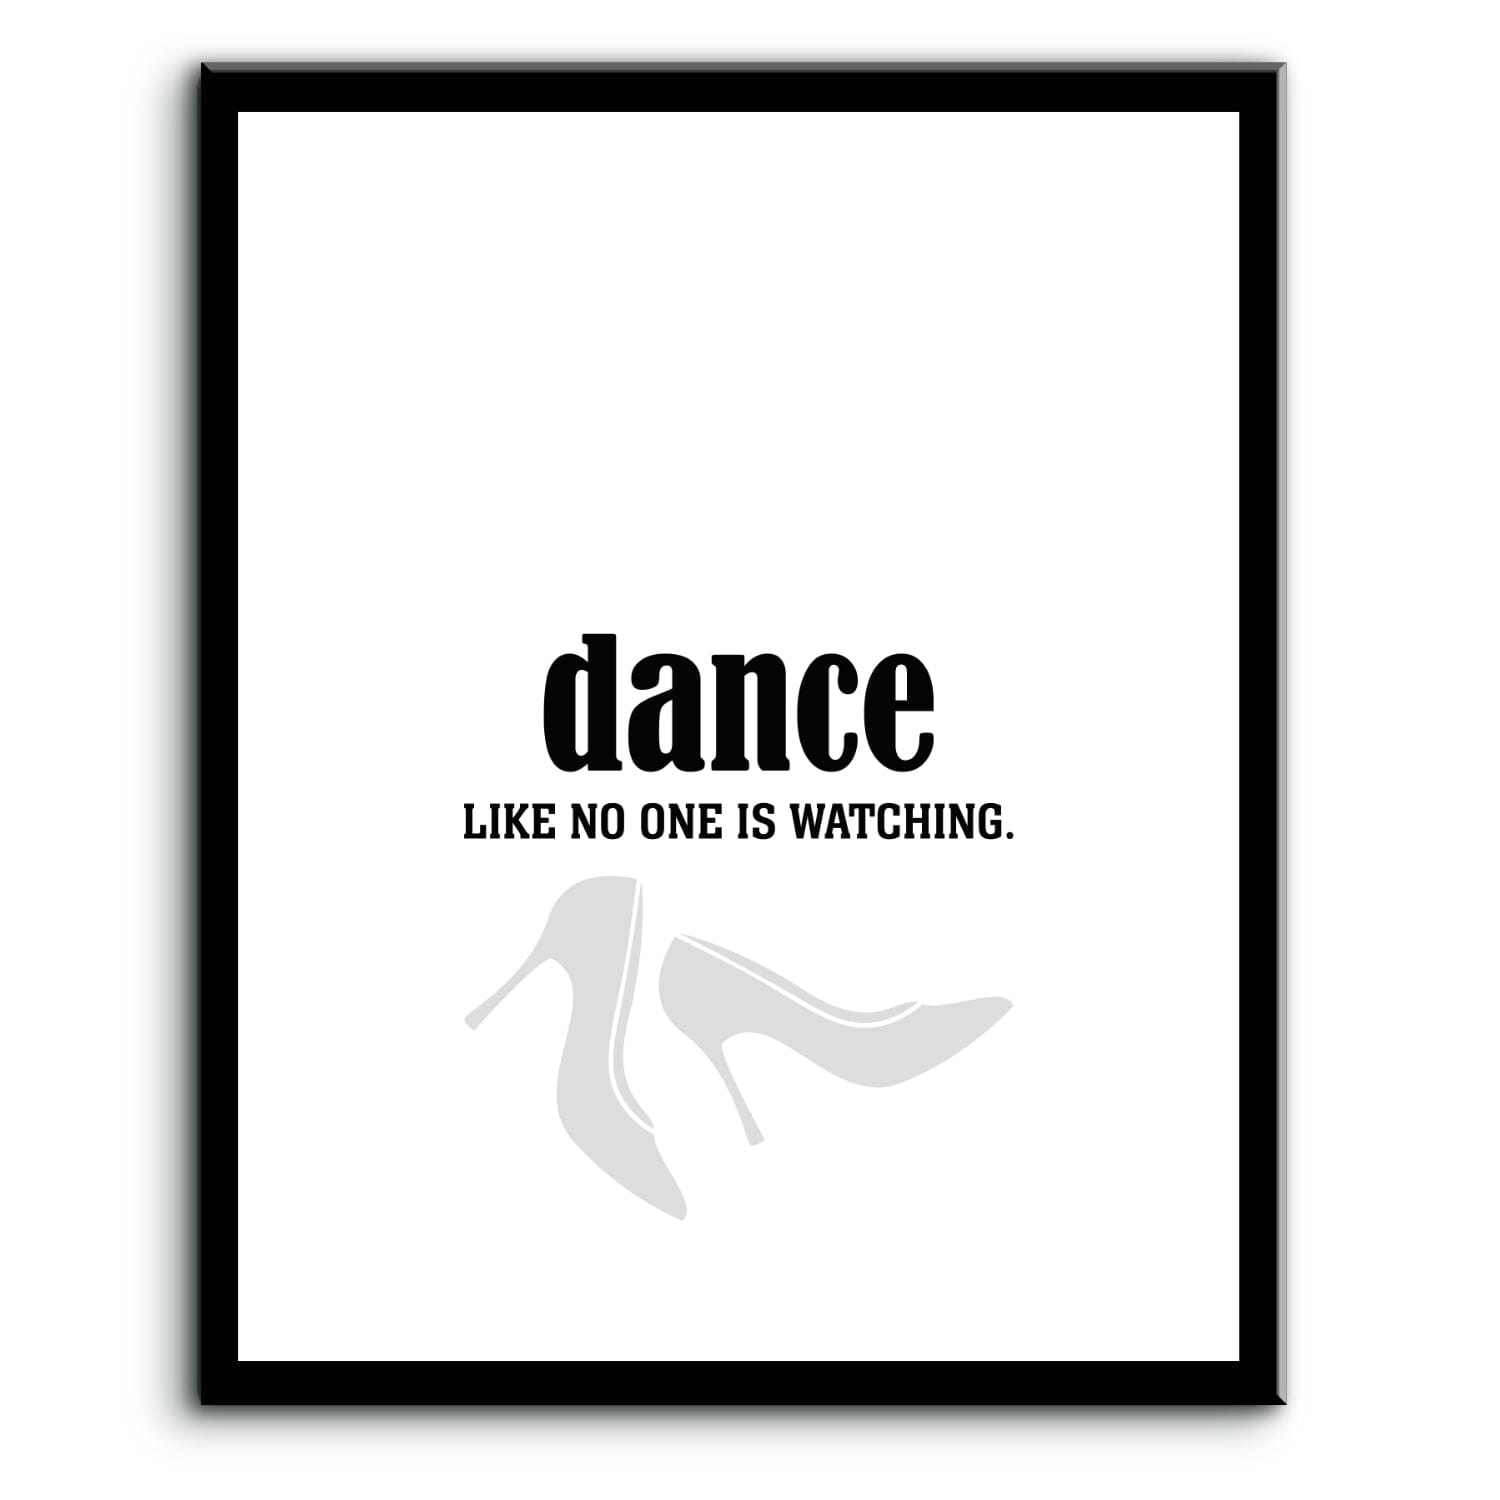 Dance Like No One is Watching - Wise and Witty Art Print Wise and Wiseass Quotes Song Lyrics Art 8x10 Plaque Mount 